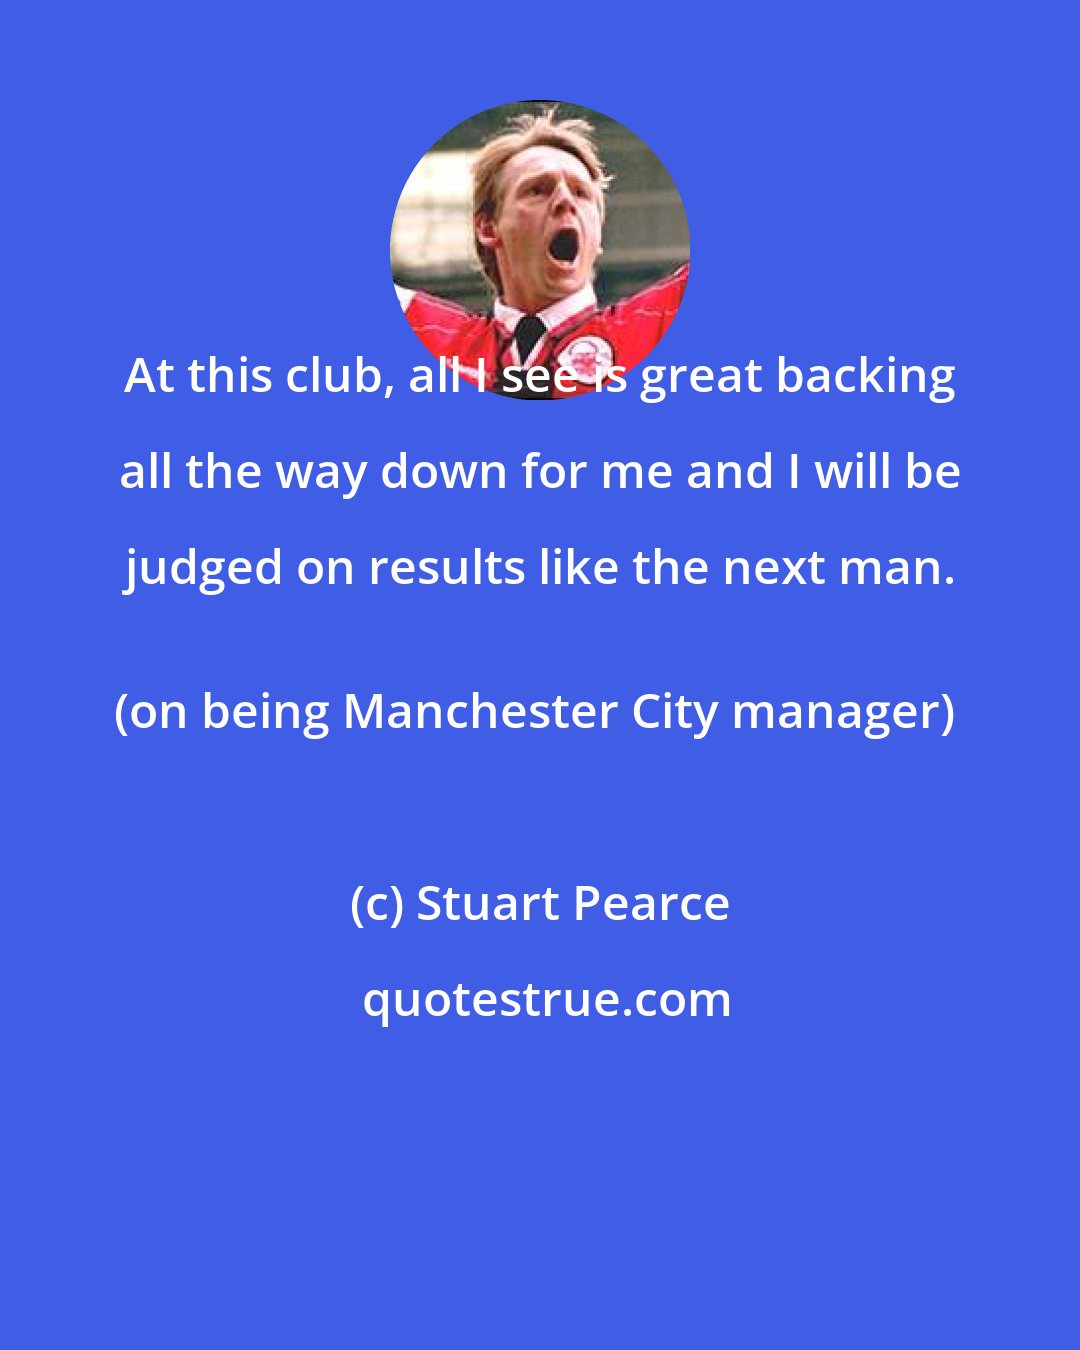 Stuart Pearce: At this club, all I see is great backing all the way down for me and I will be judged on results like the next man. 
(on being Manchester City manager)